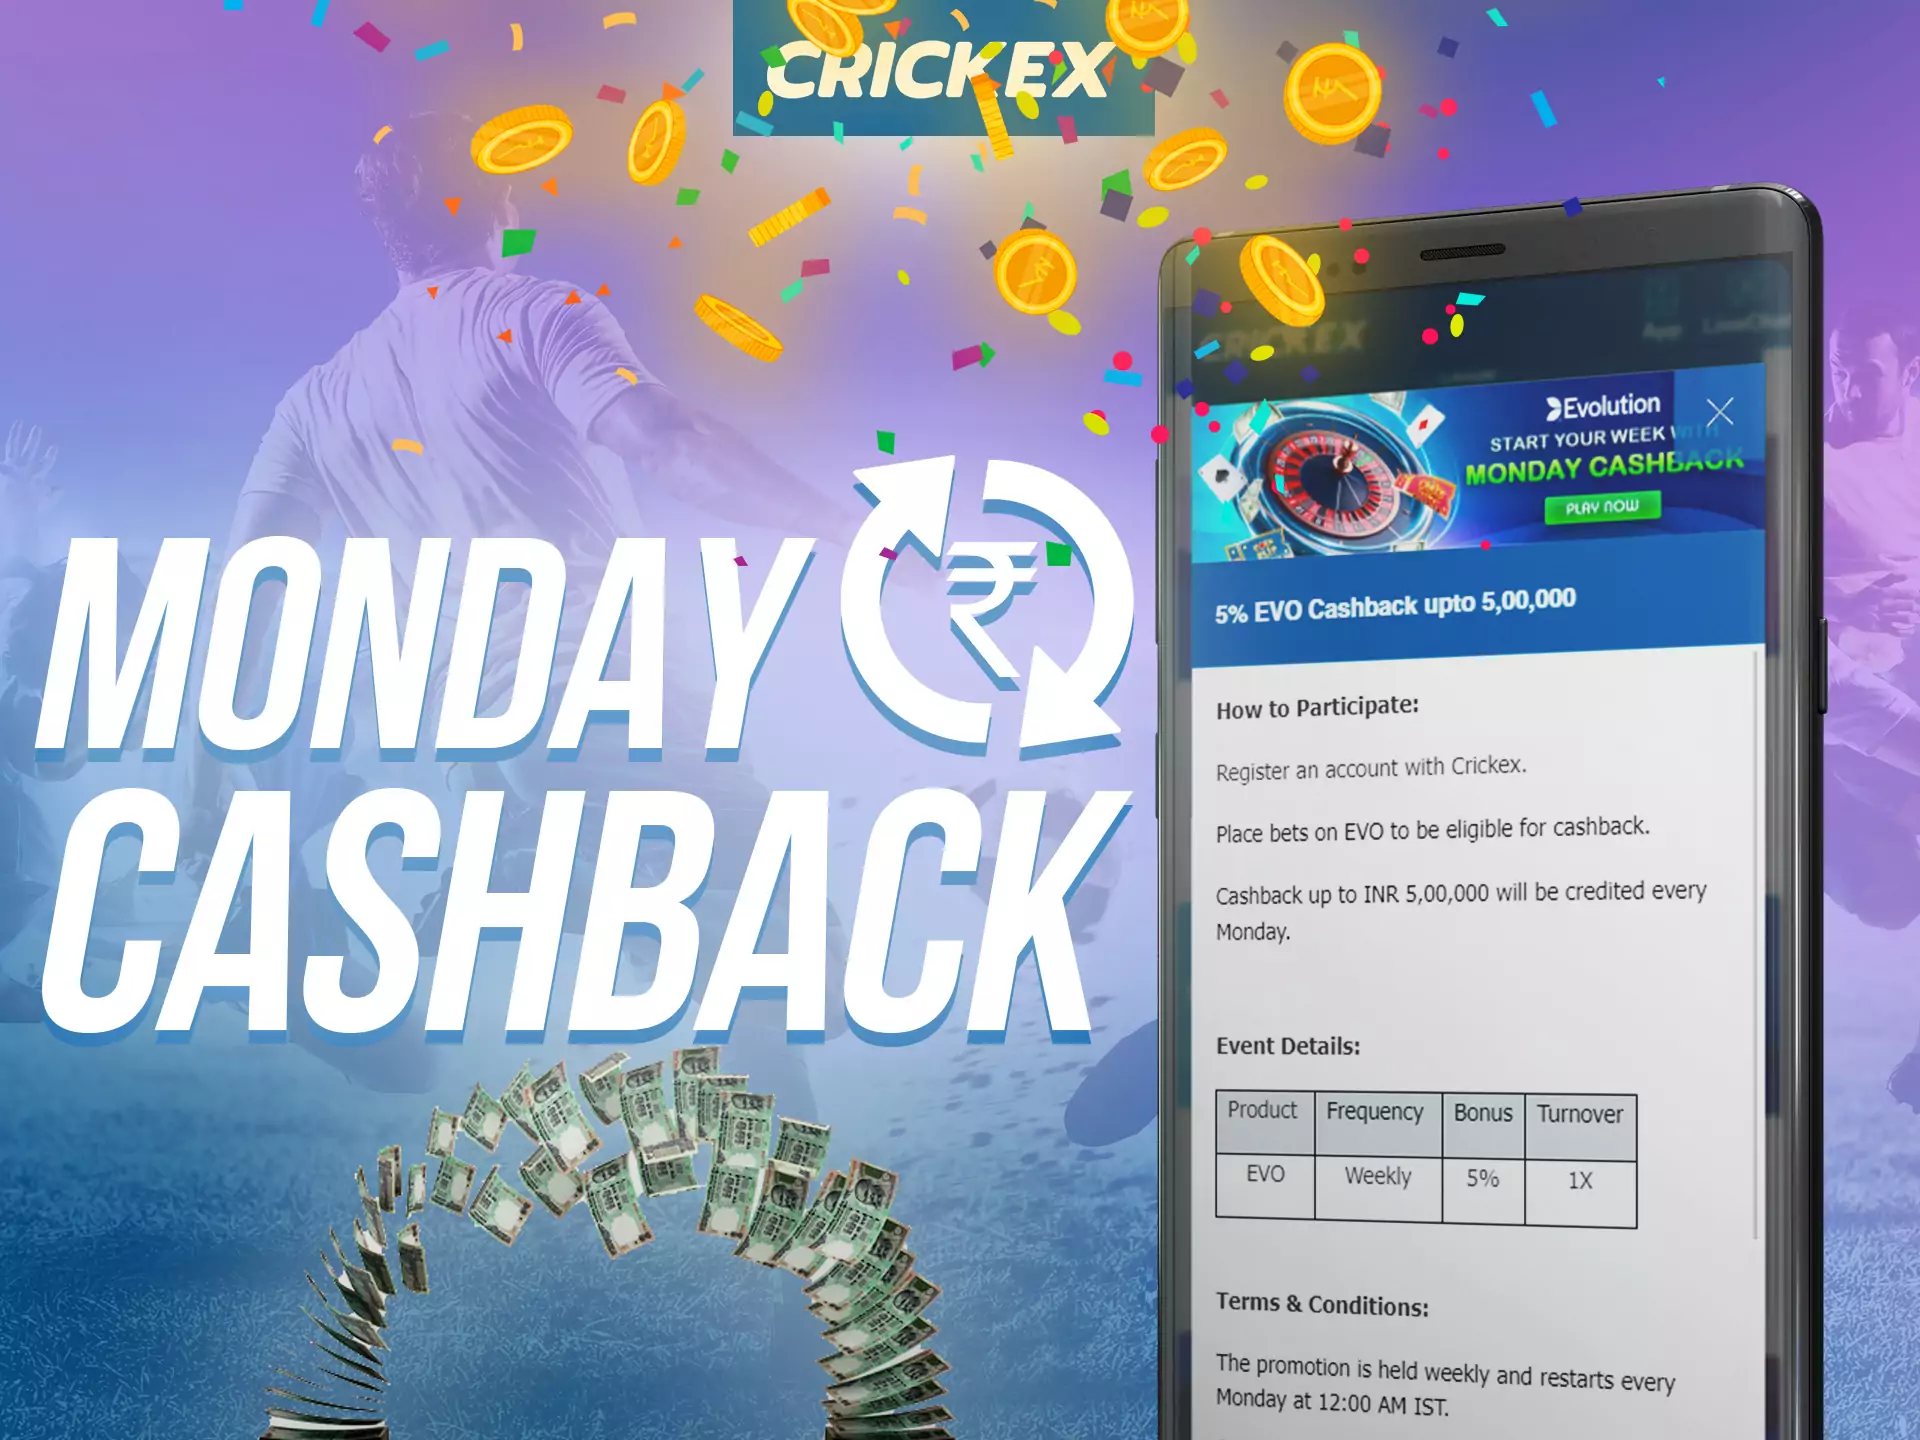 In the Crickex app you can count on a cashback bonus on Mondays.